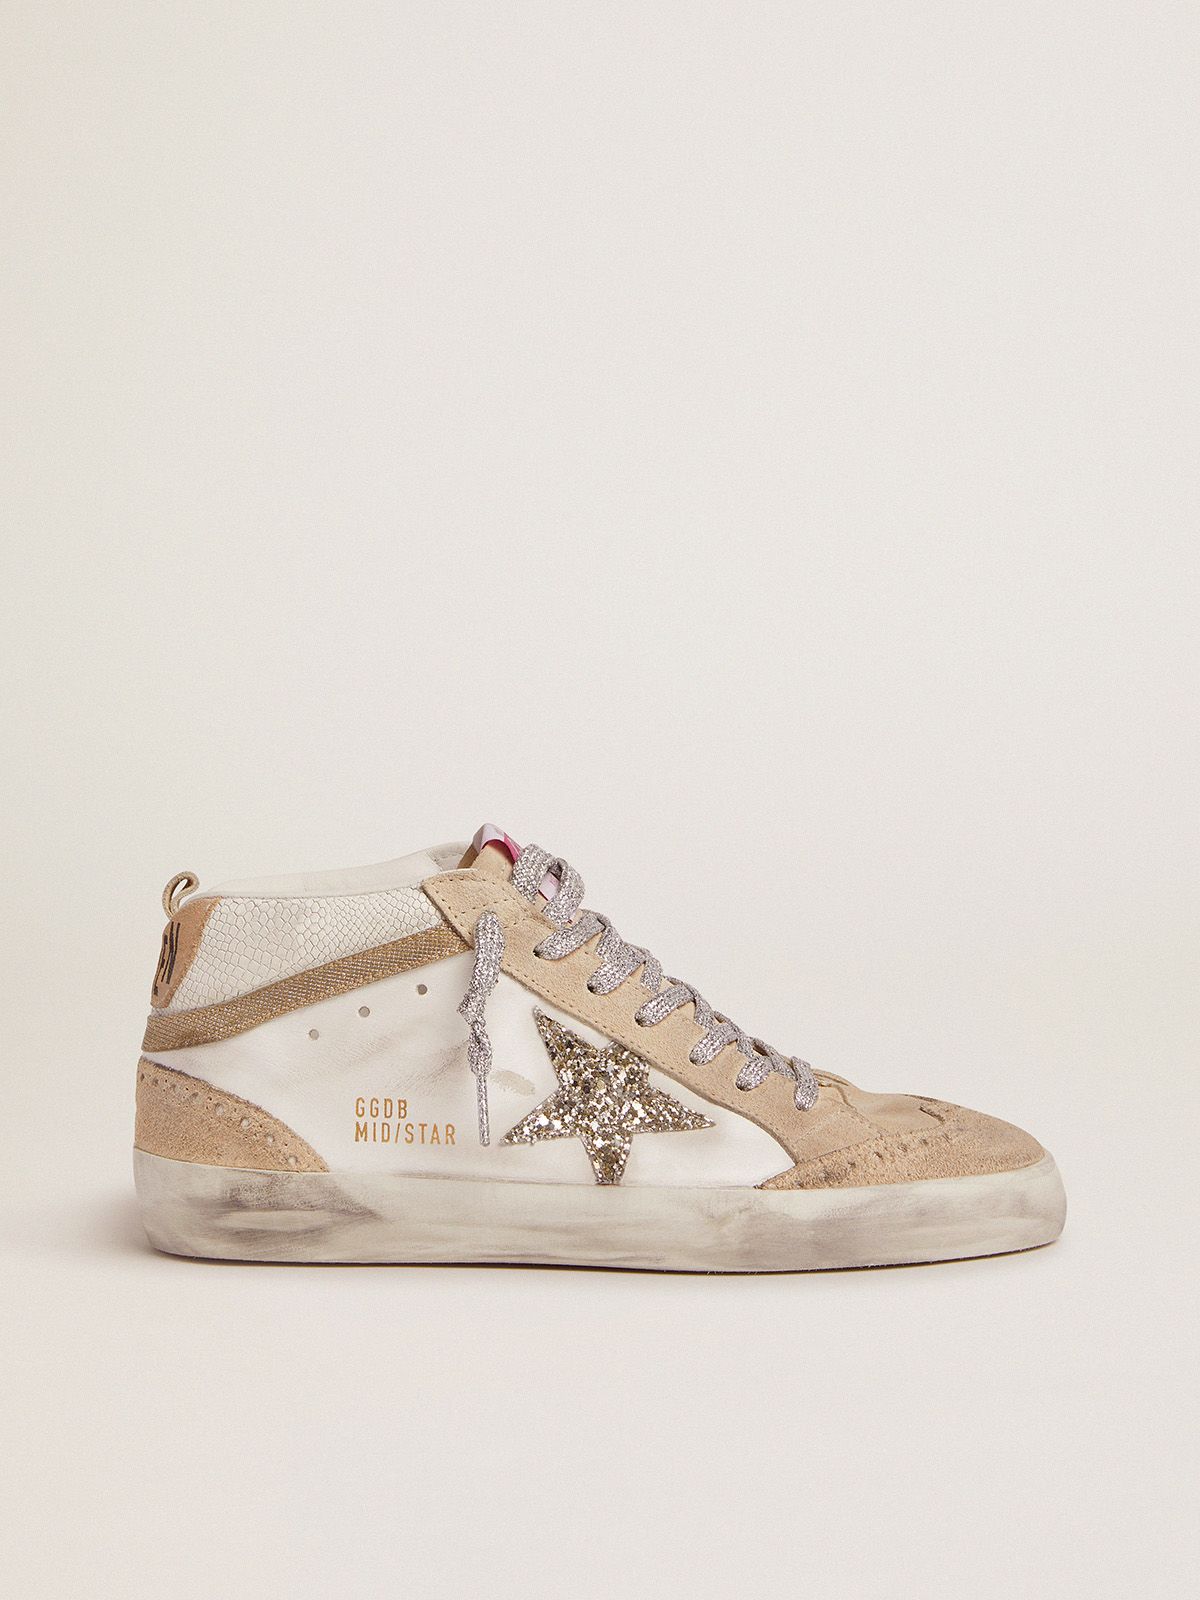 Mid Star LTD sneakers with light green glitter star and snake-print leather insert